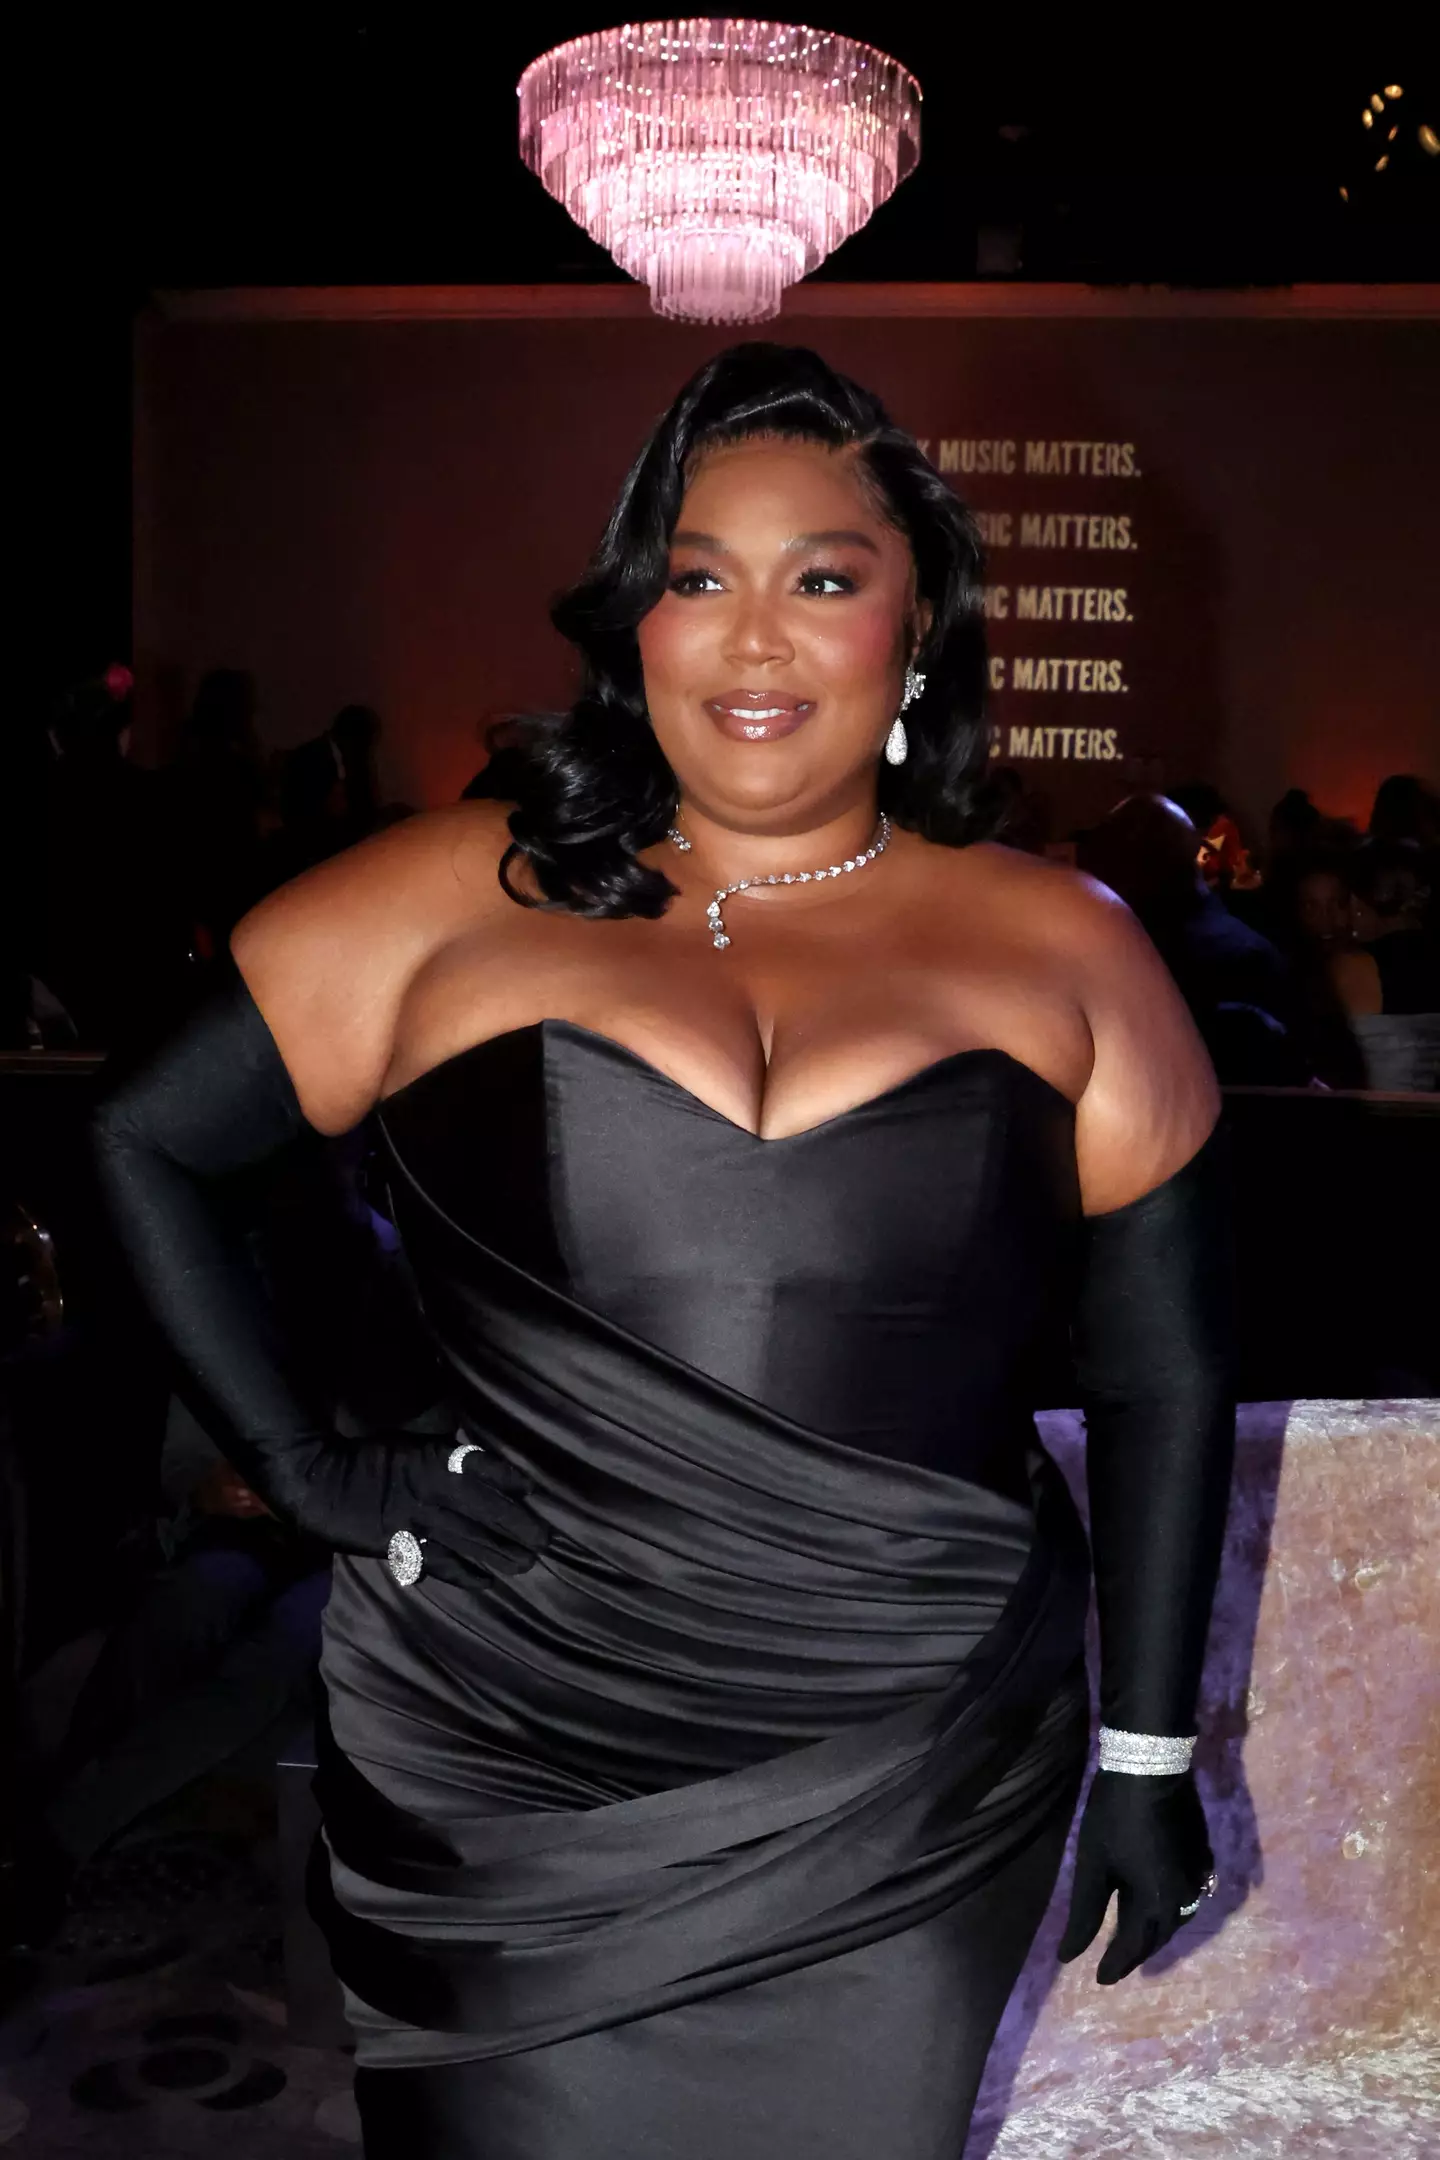 Lizzo is typically an advocate for body positivity.